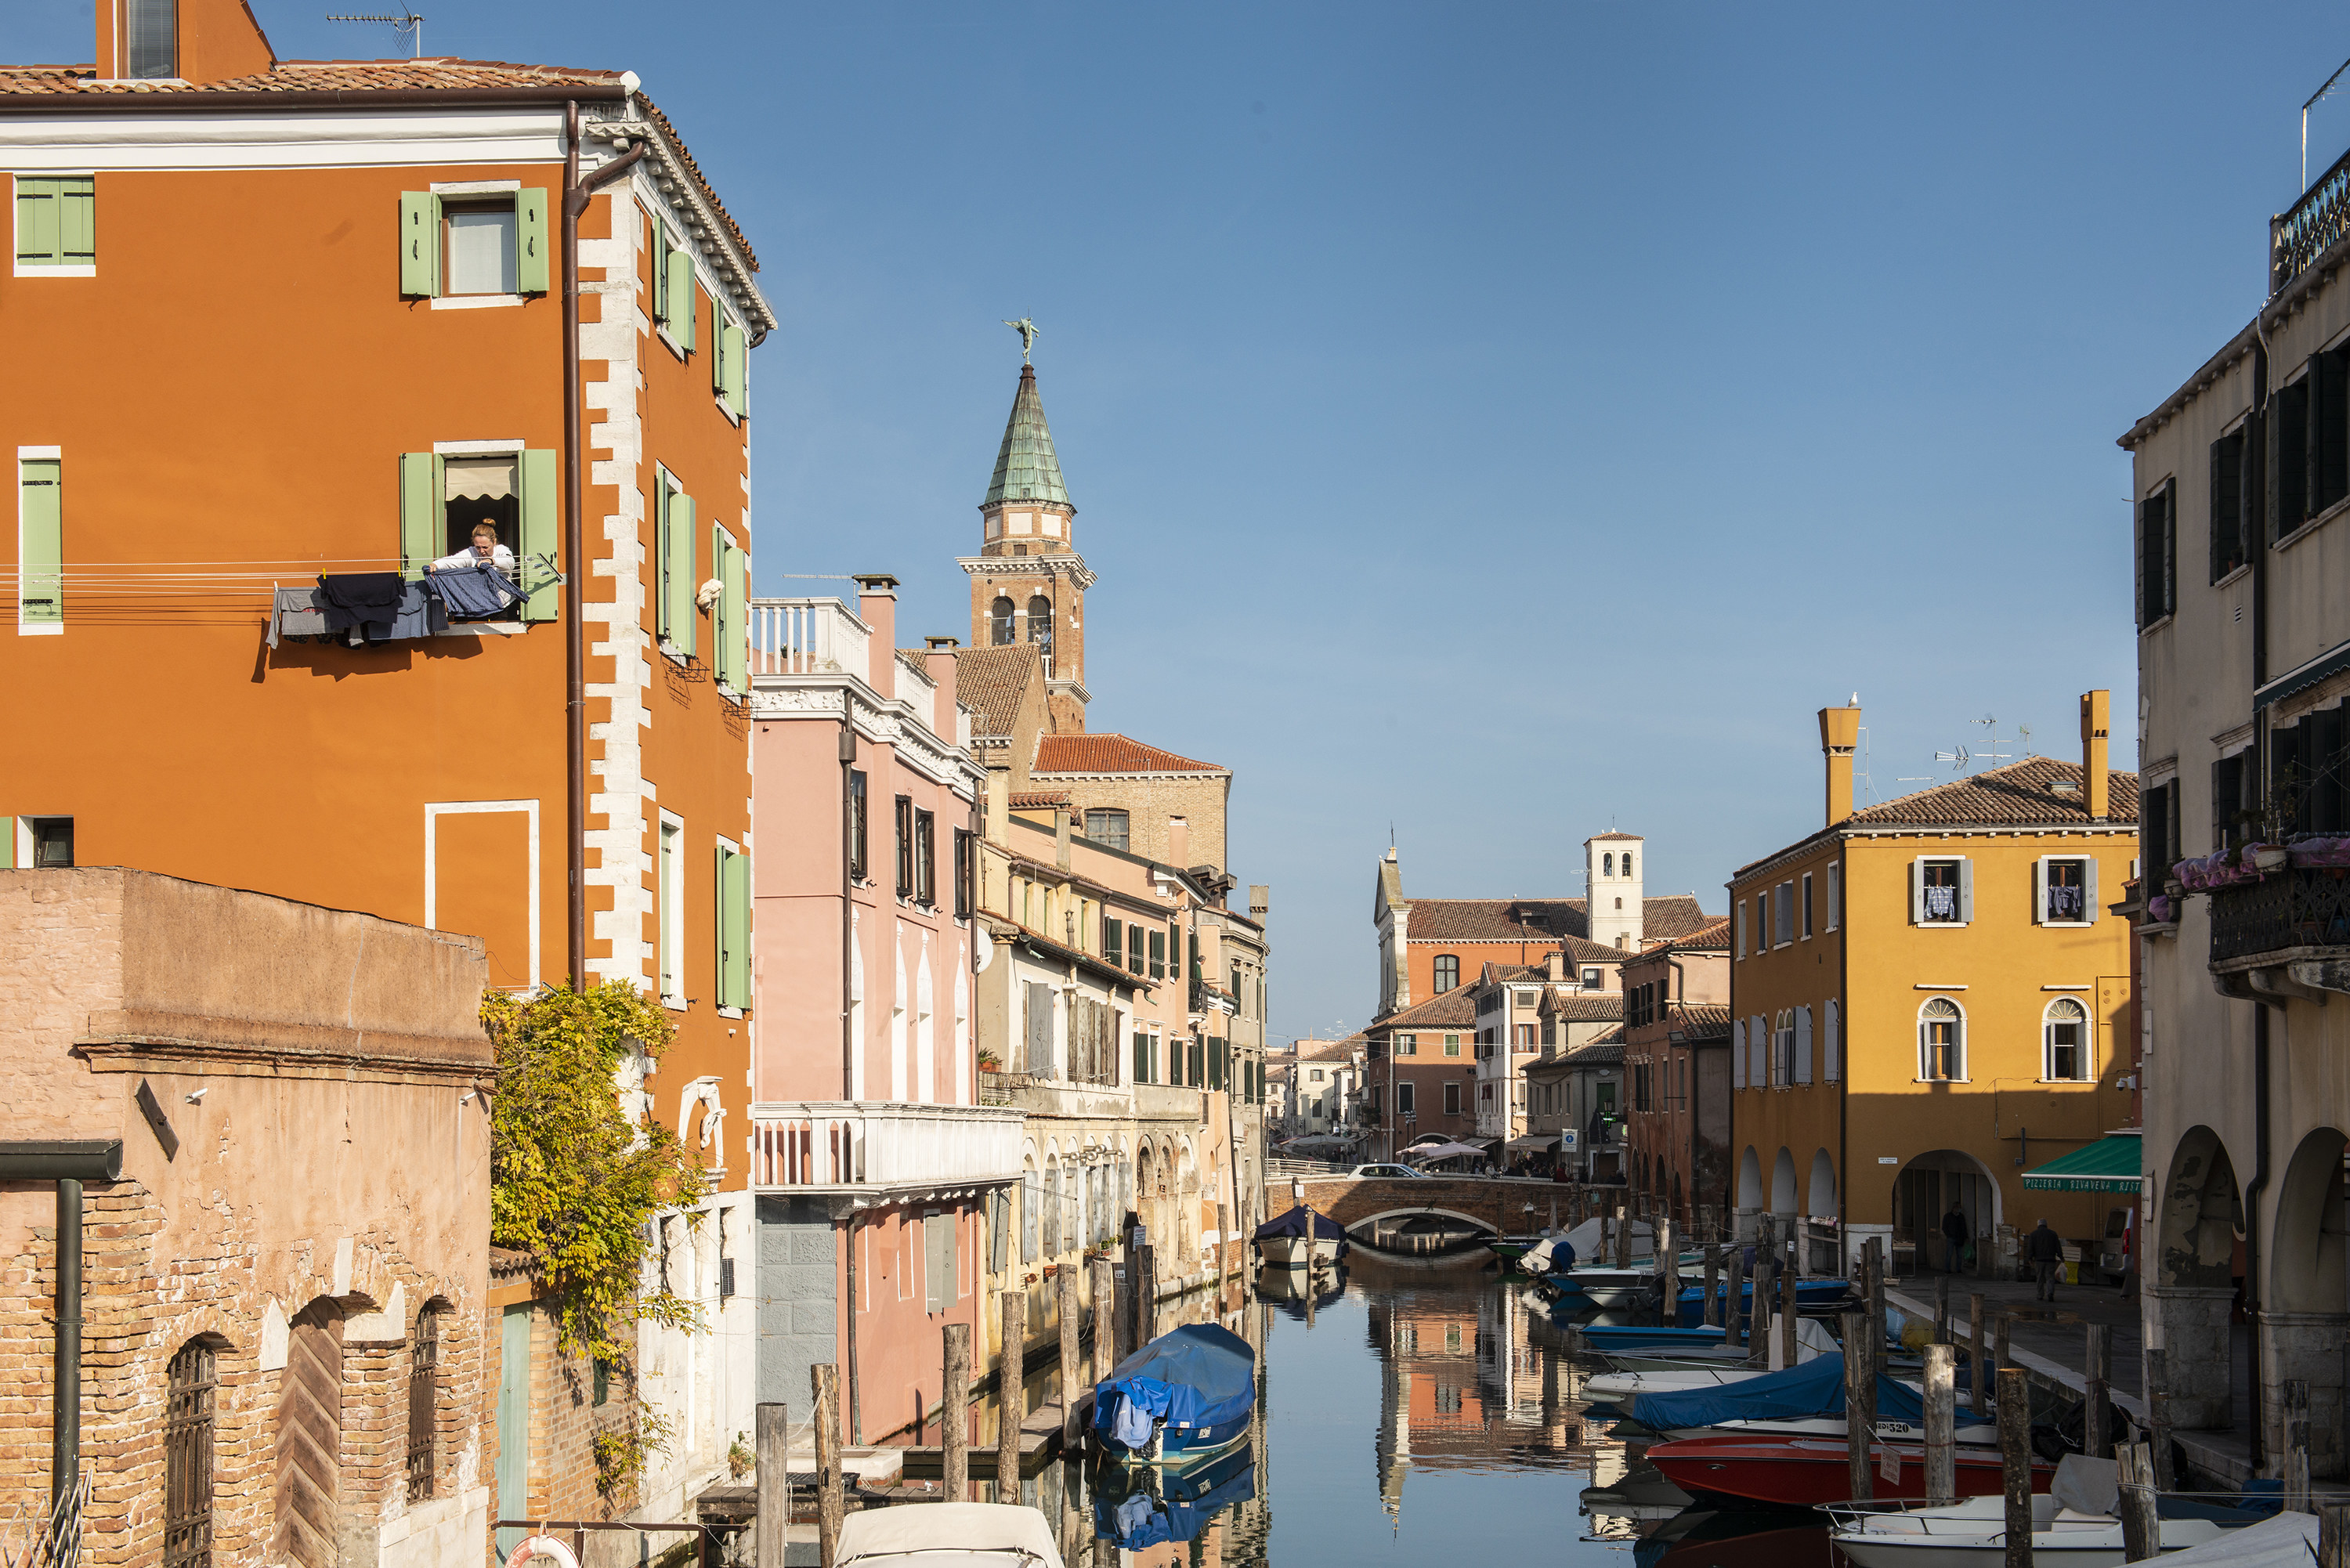 Scene along the Canal Vena, Chioggia, Italy, with a canal and boats and a blue sky